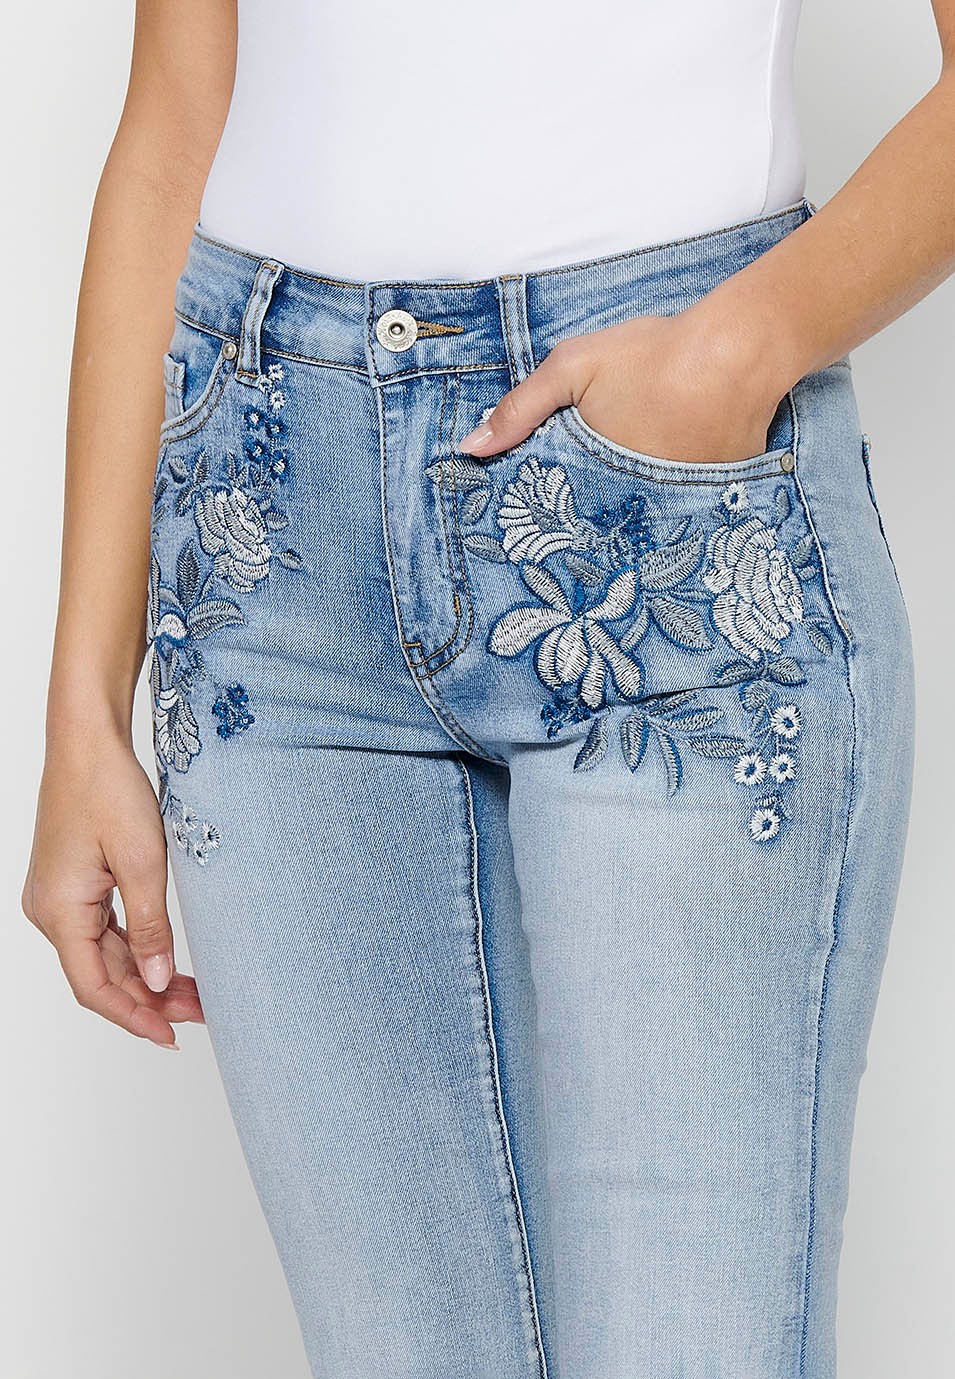 Long flared denim pants with front zipper closure and button with floral front embroidery and five pockets, one light blue pocket for women 8